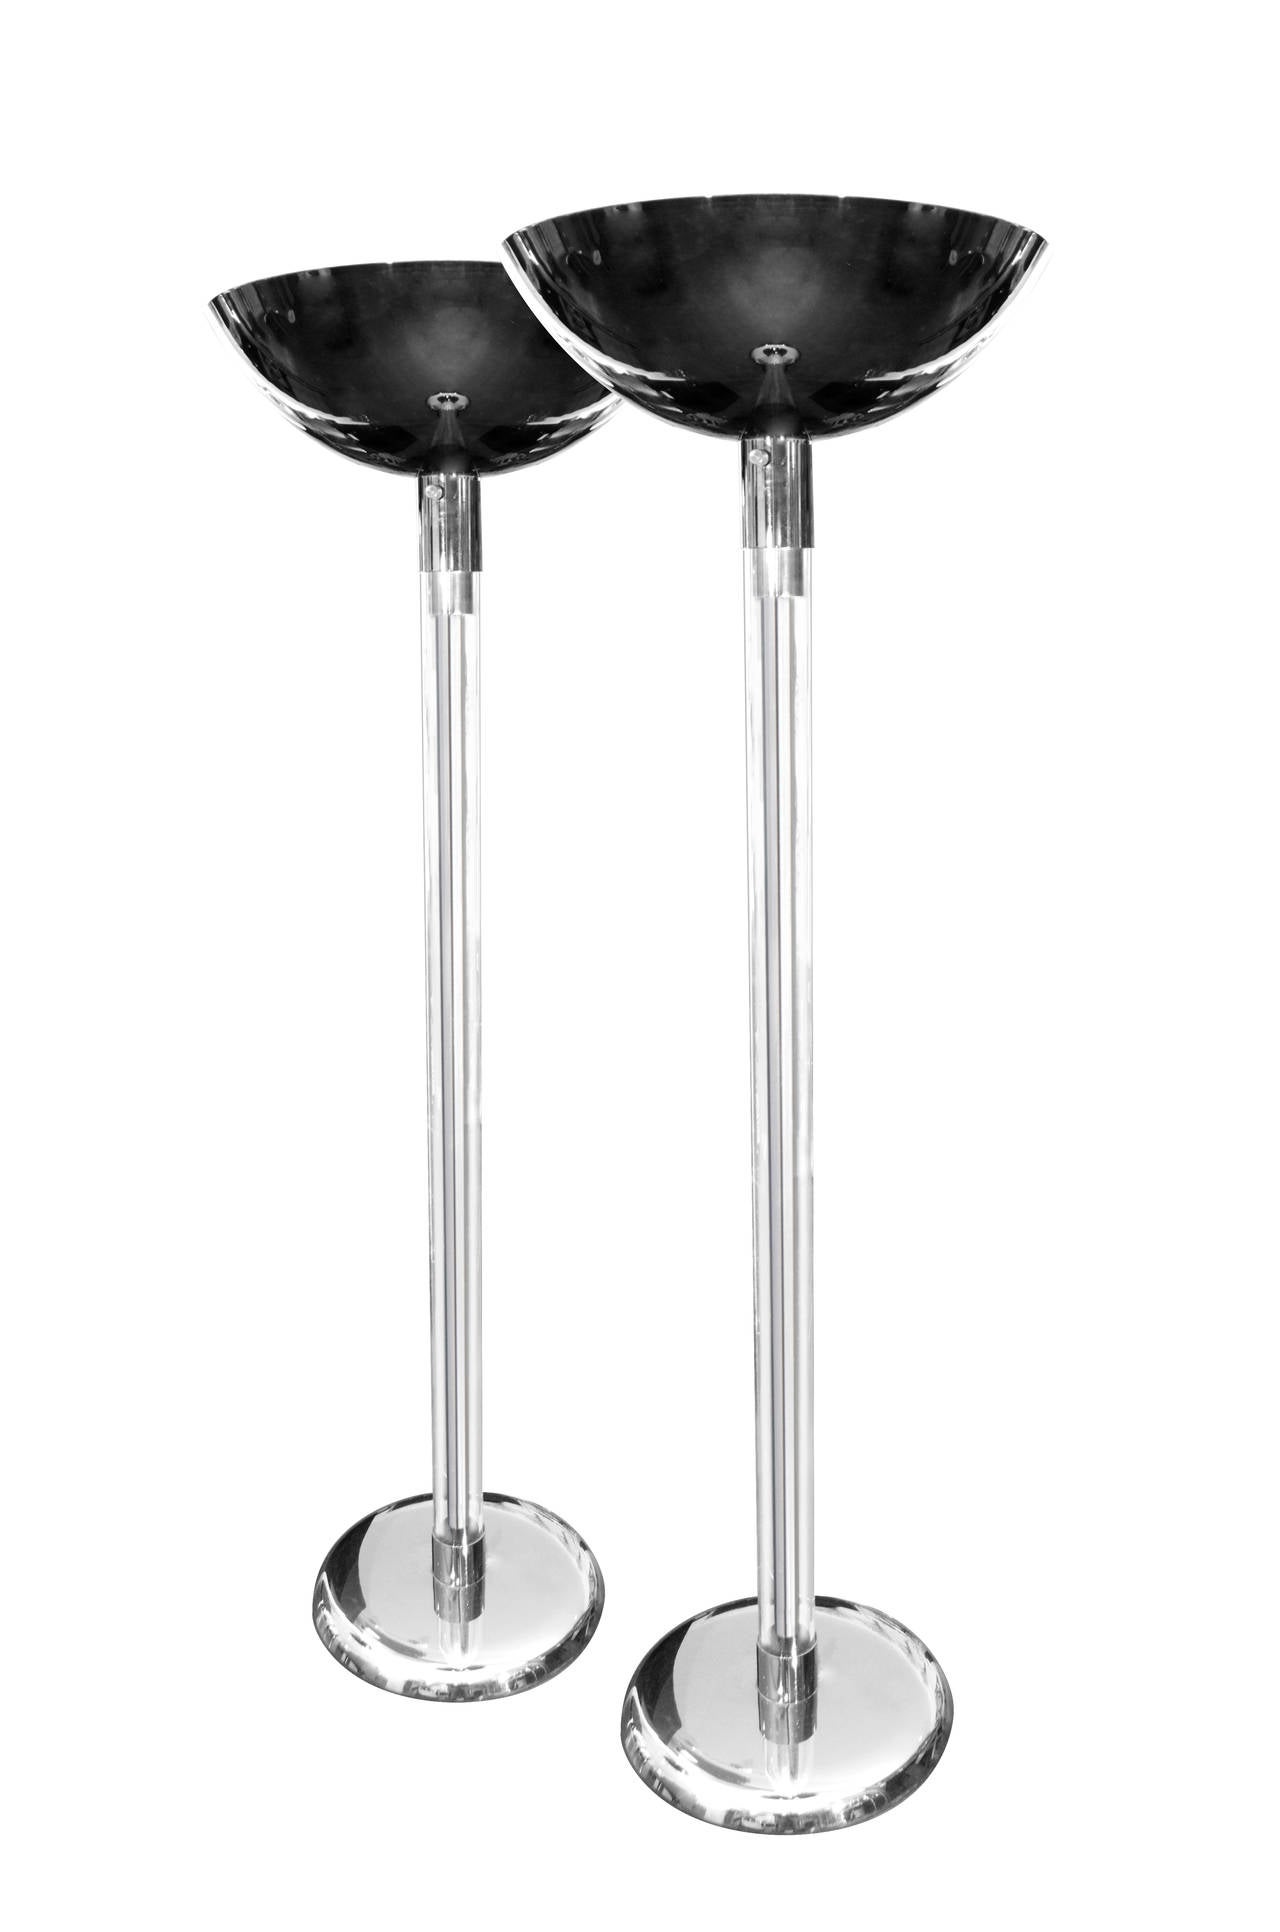 Rare pair of grandly scaled torchiere floor lamps by Karl Springer, circa 1970s. Plated in polished gunmetal with Lucite sheathing on the center columns. Very, very good condition.